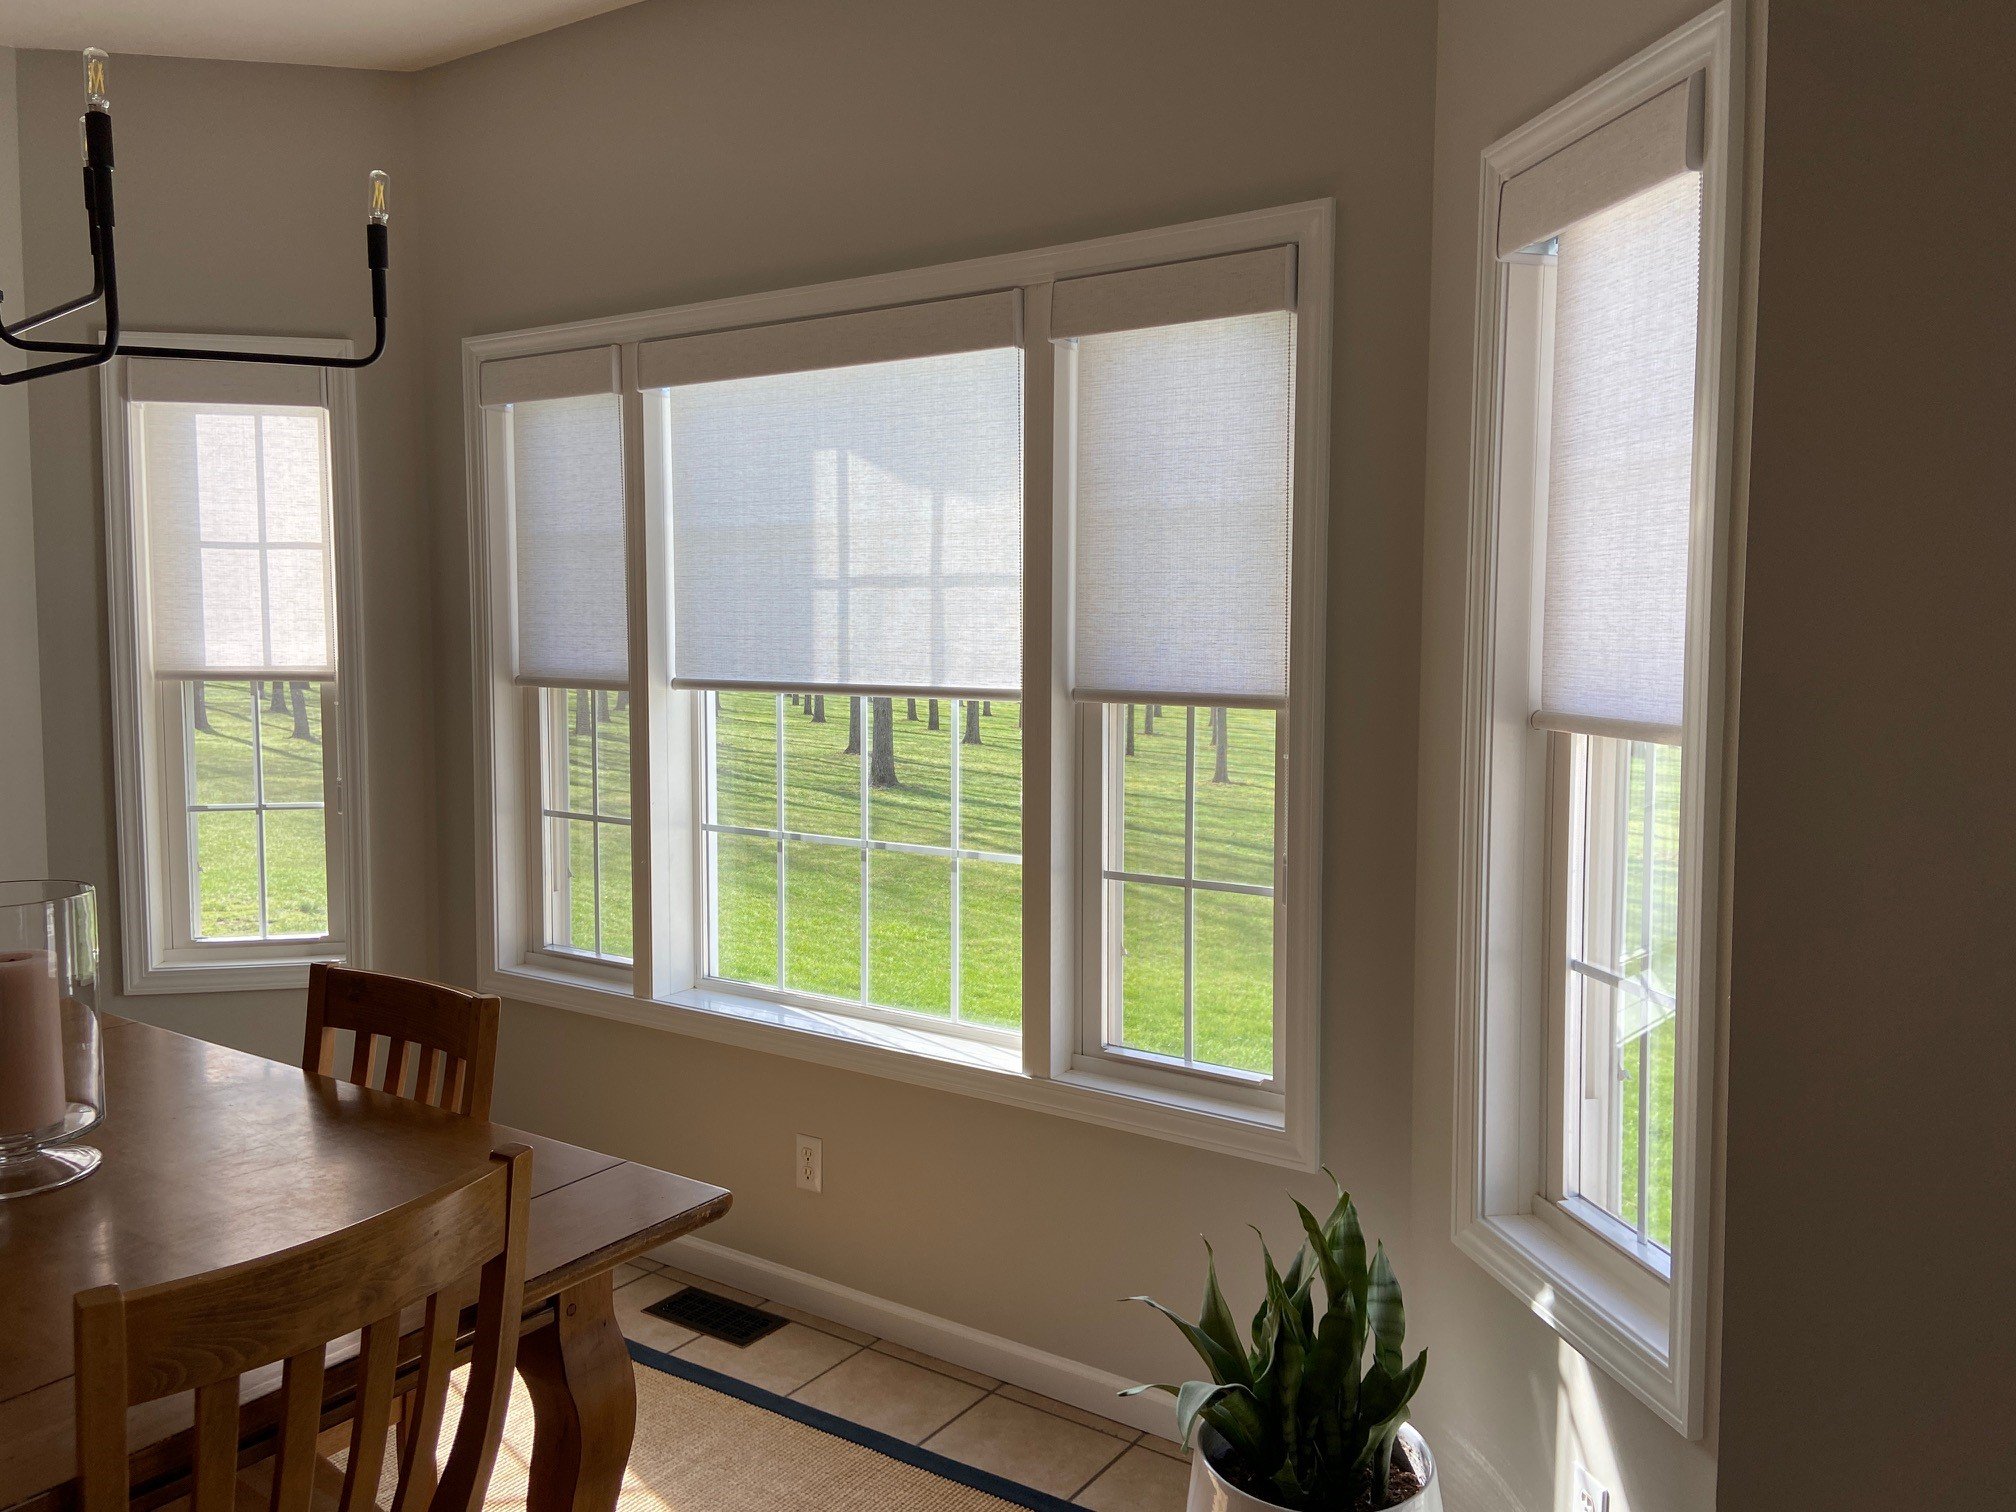  Hunter Douglas Designer Roller Shades provide clean lines and a timeless aesthetic that complement any style 